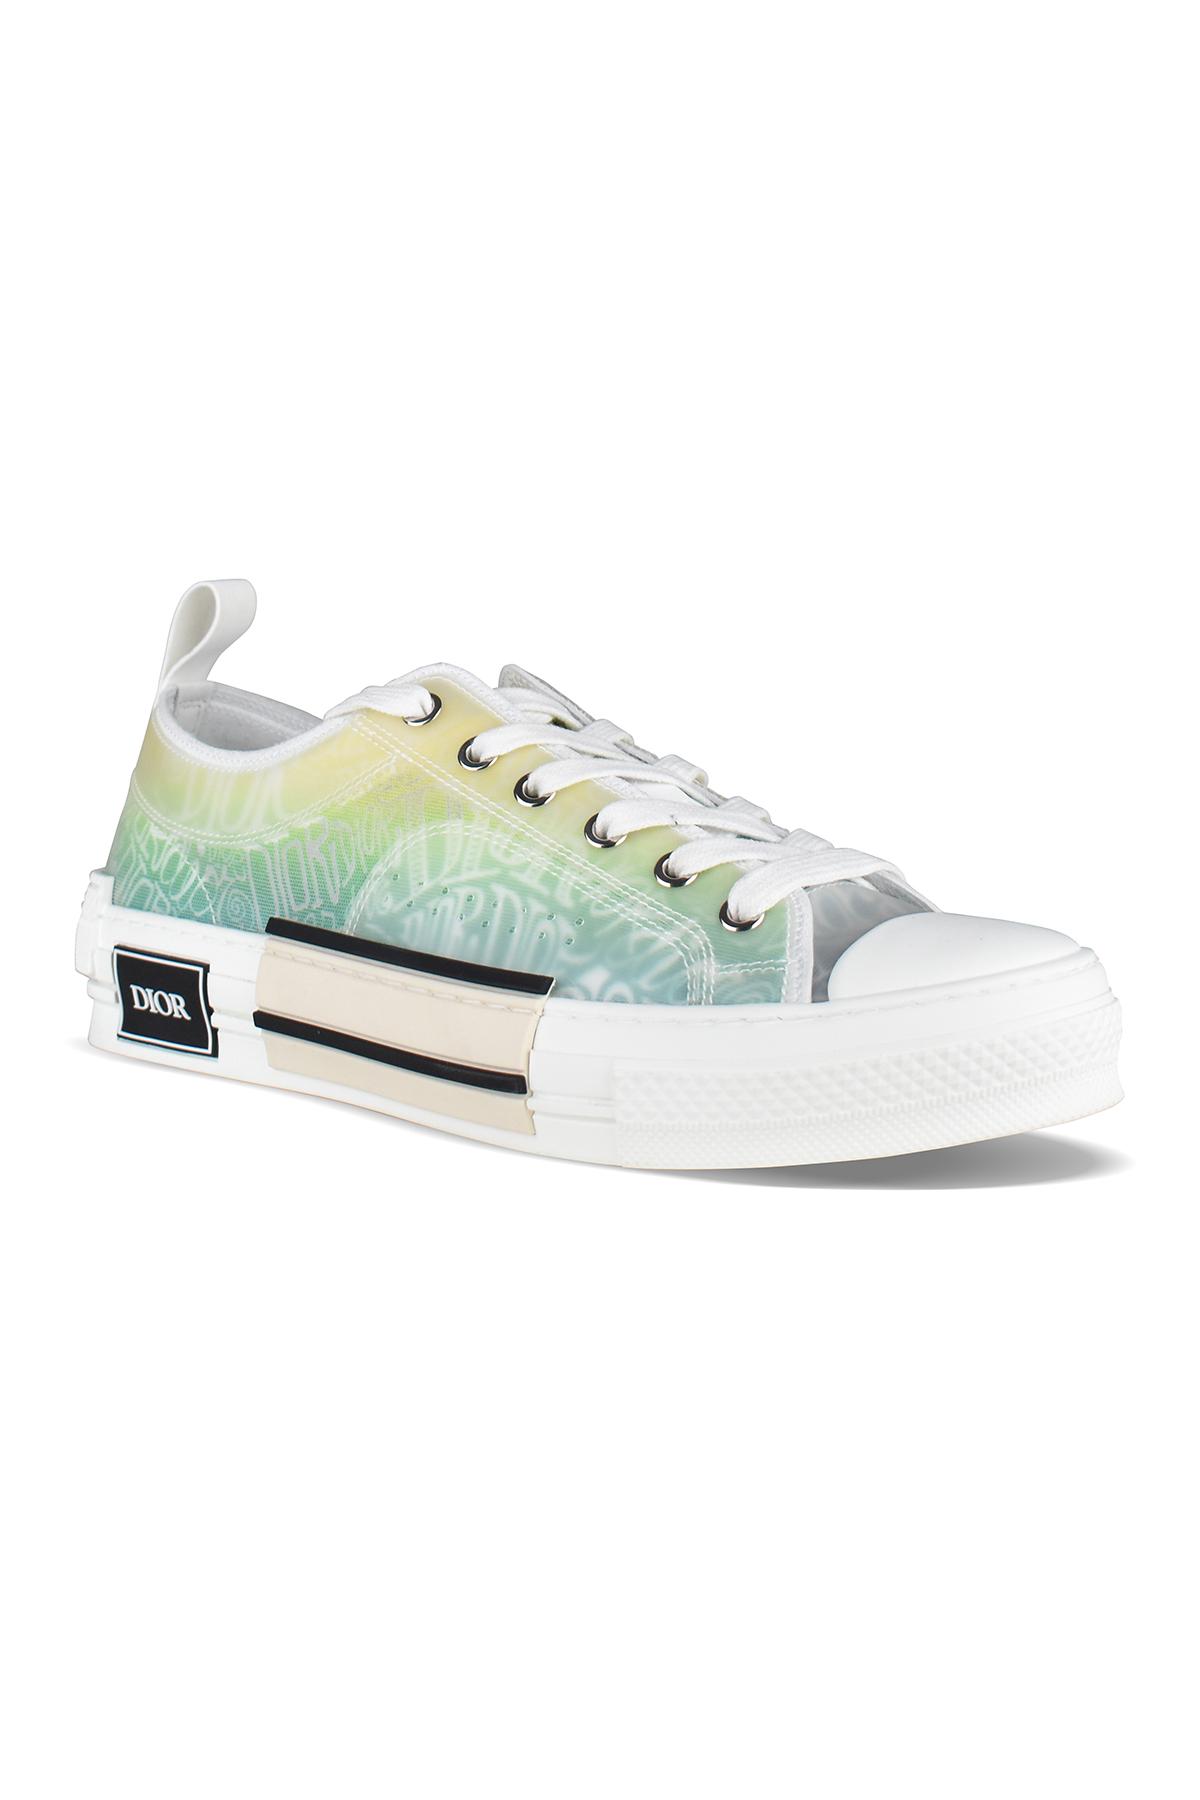 Dior B23 Sneakers in Green for Men | Lyst